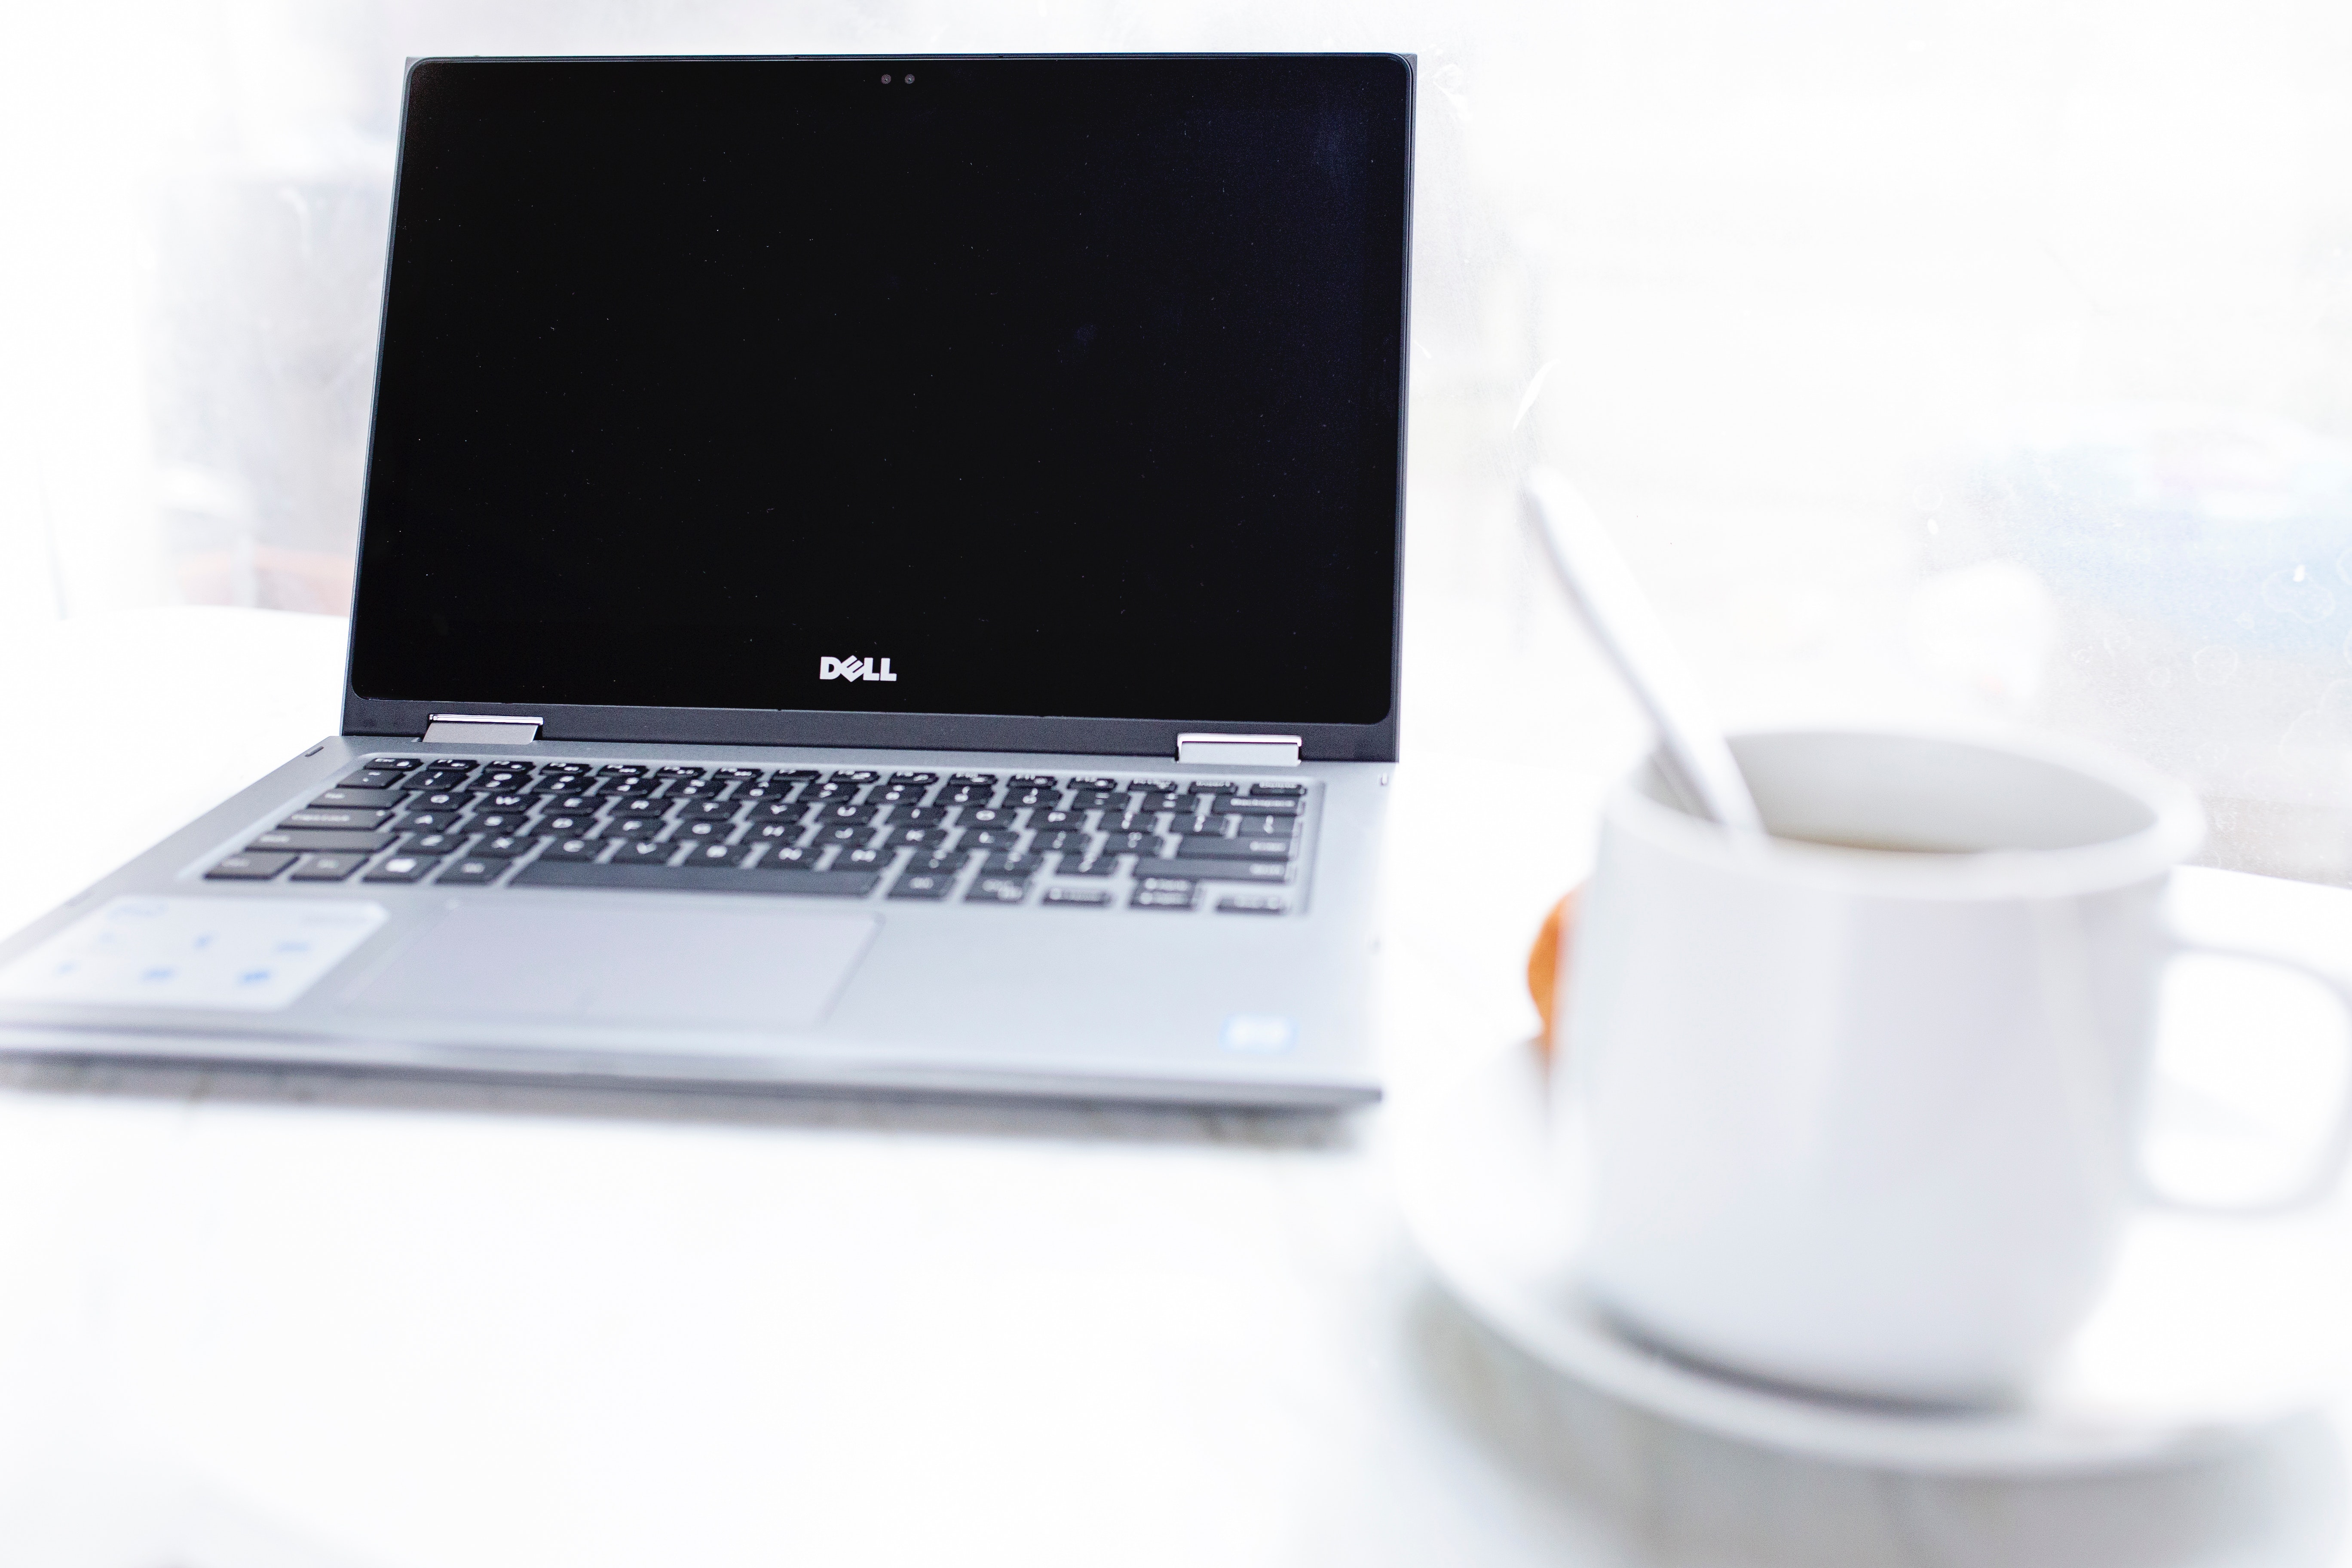 Dell Laptop in Front of Cup of Coffee, Blur, Keyboard, Technology, Tea, HQ Photo